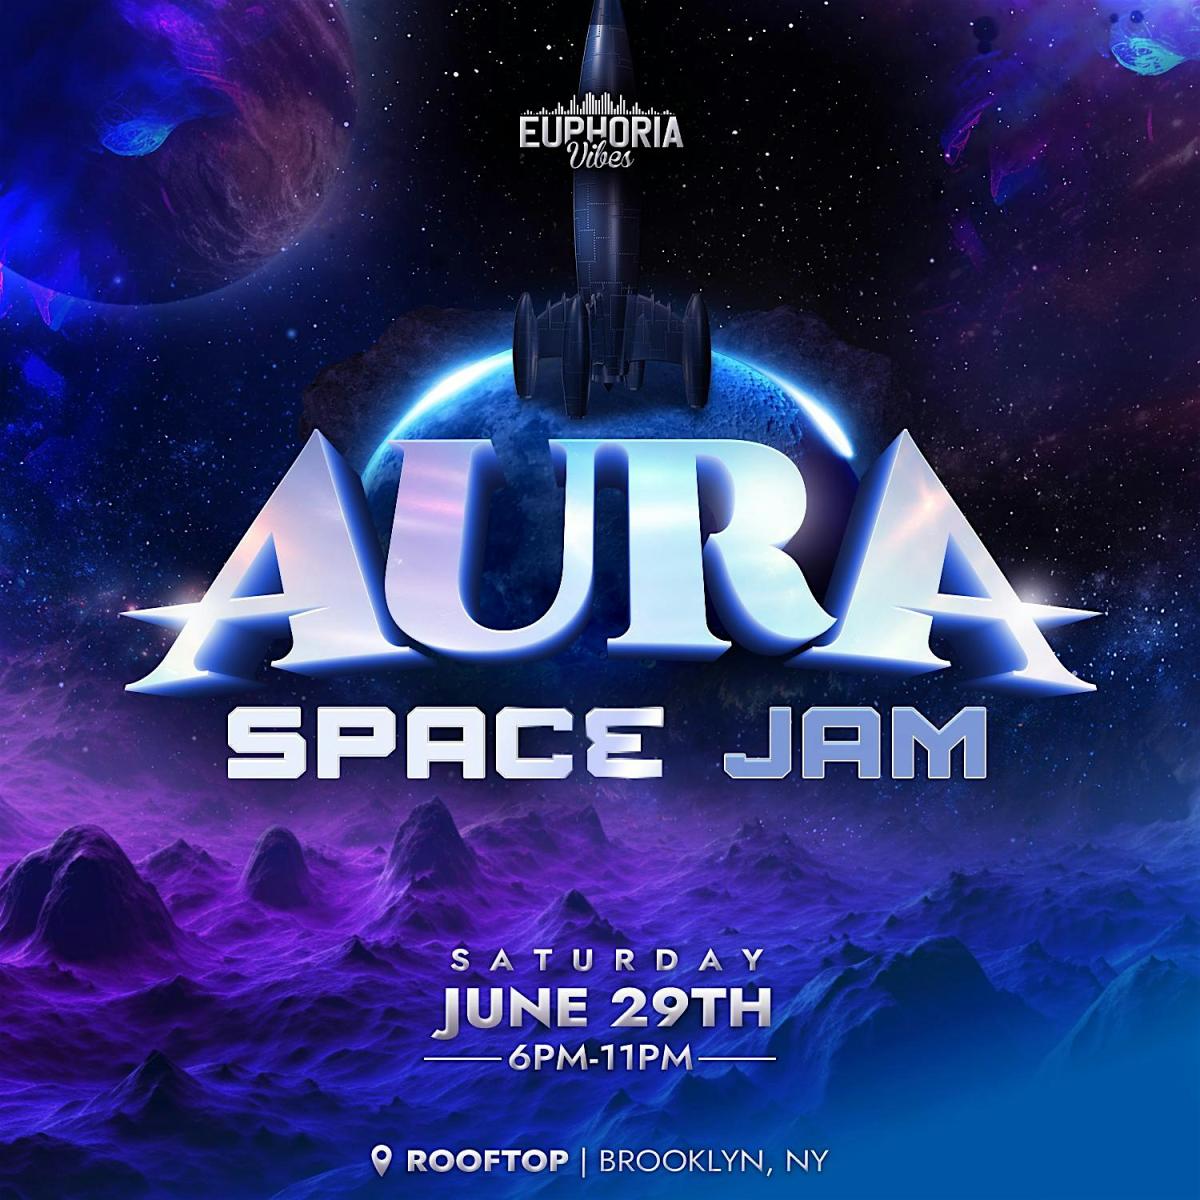 Aura: Space Jam  flyer or graphic.